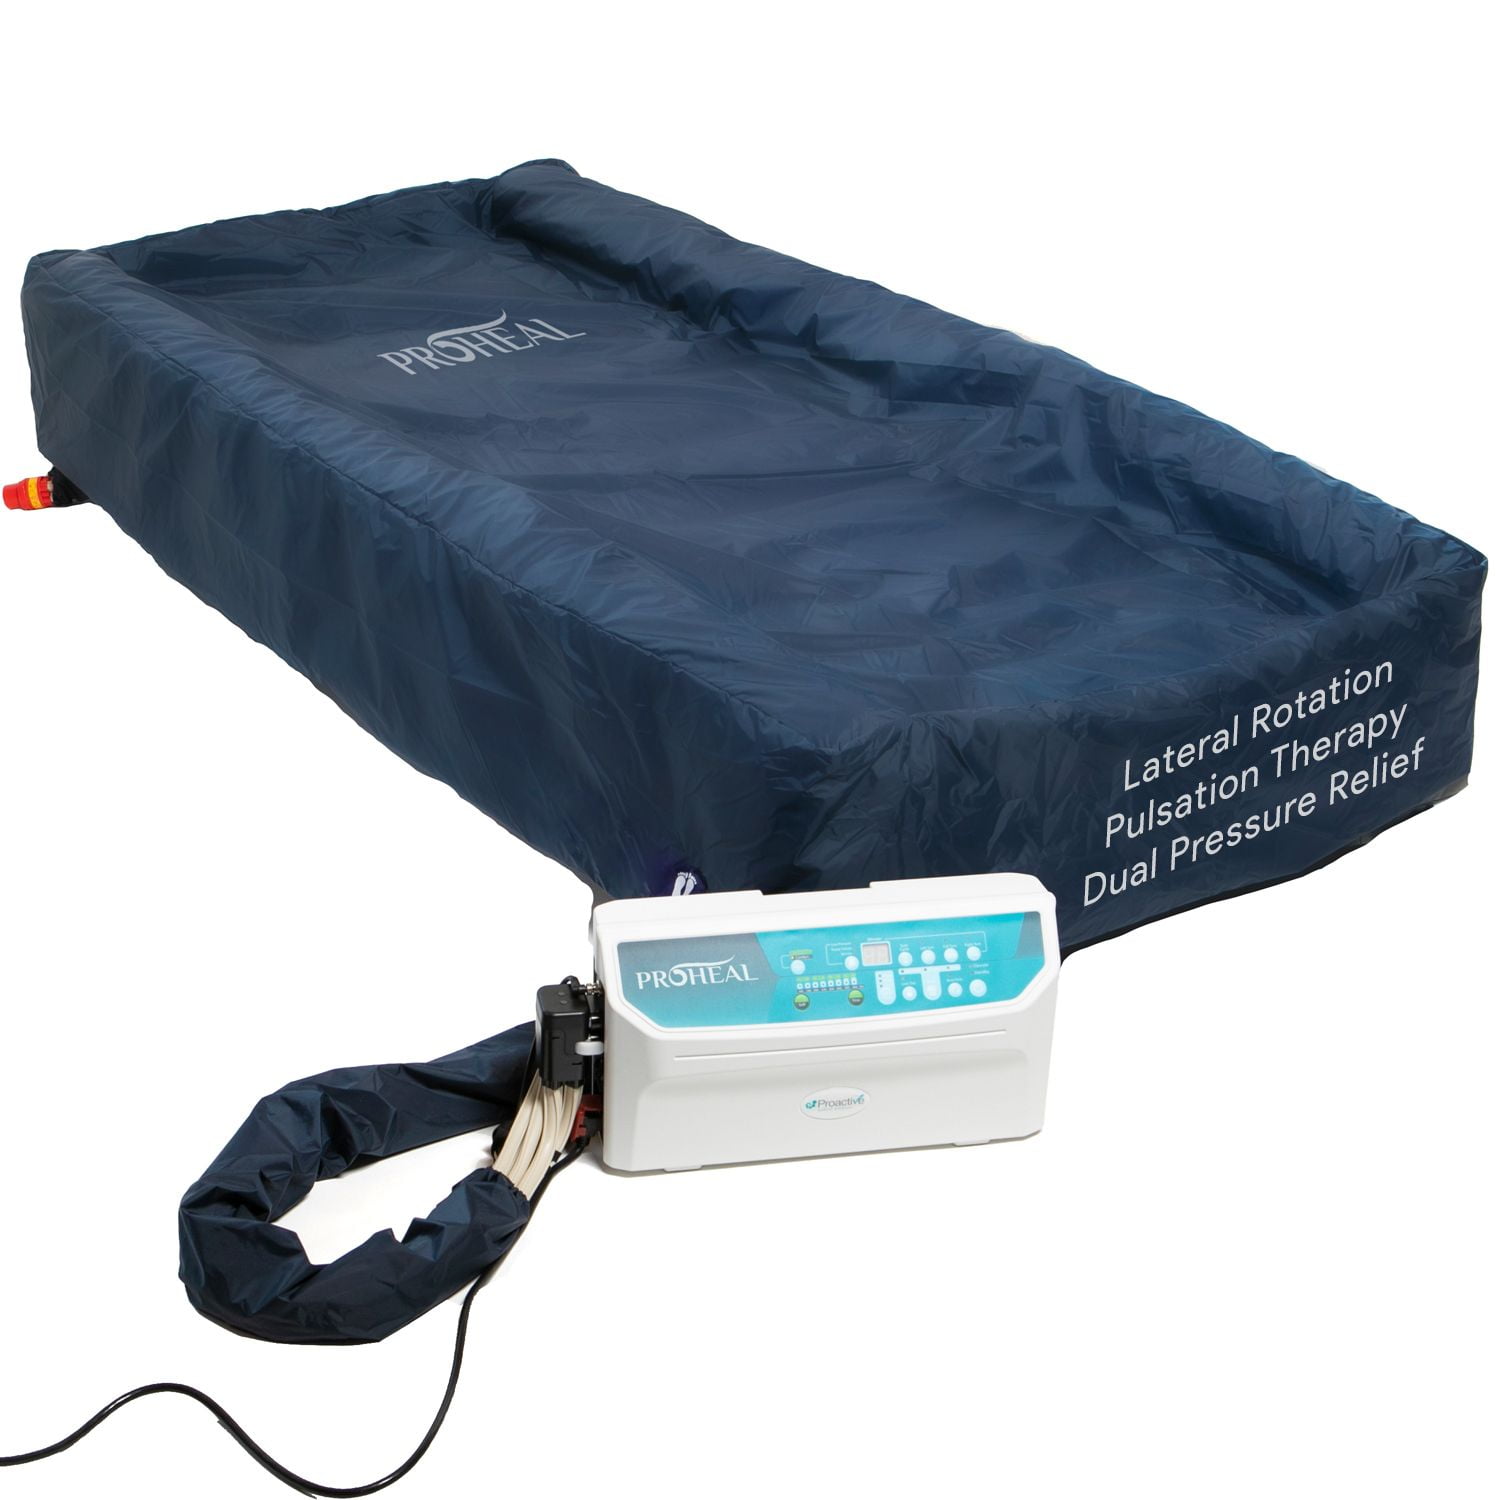 Proheal Hospital Bed Air Mattress Cover with Foam Rails - 48 x 80 x 6 x  9